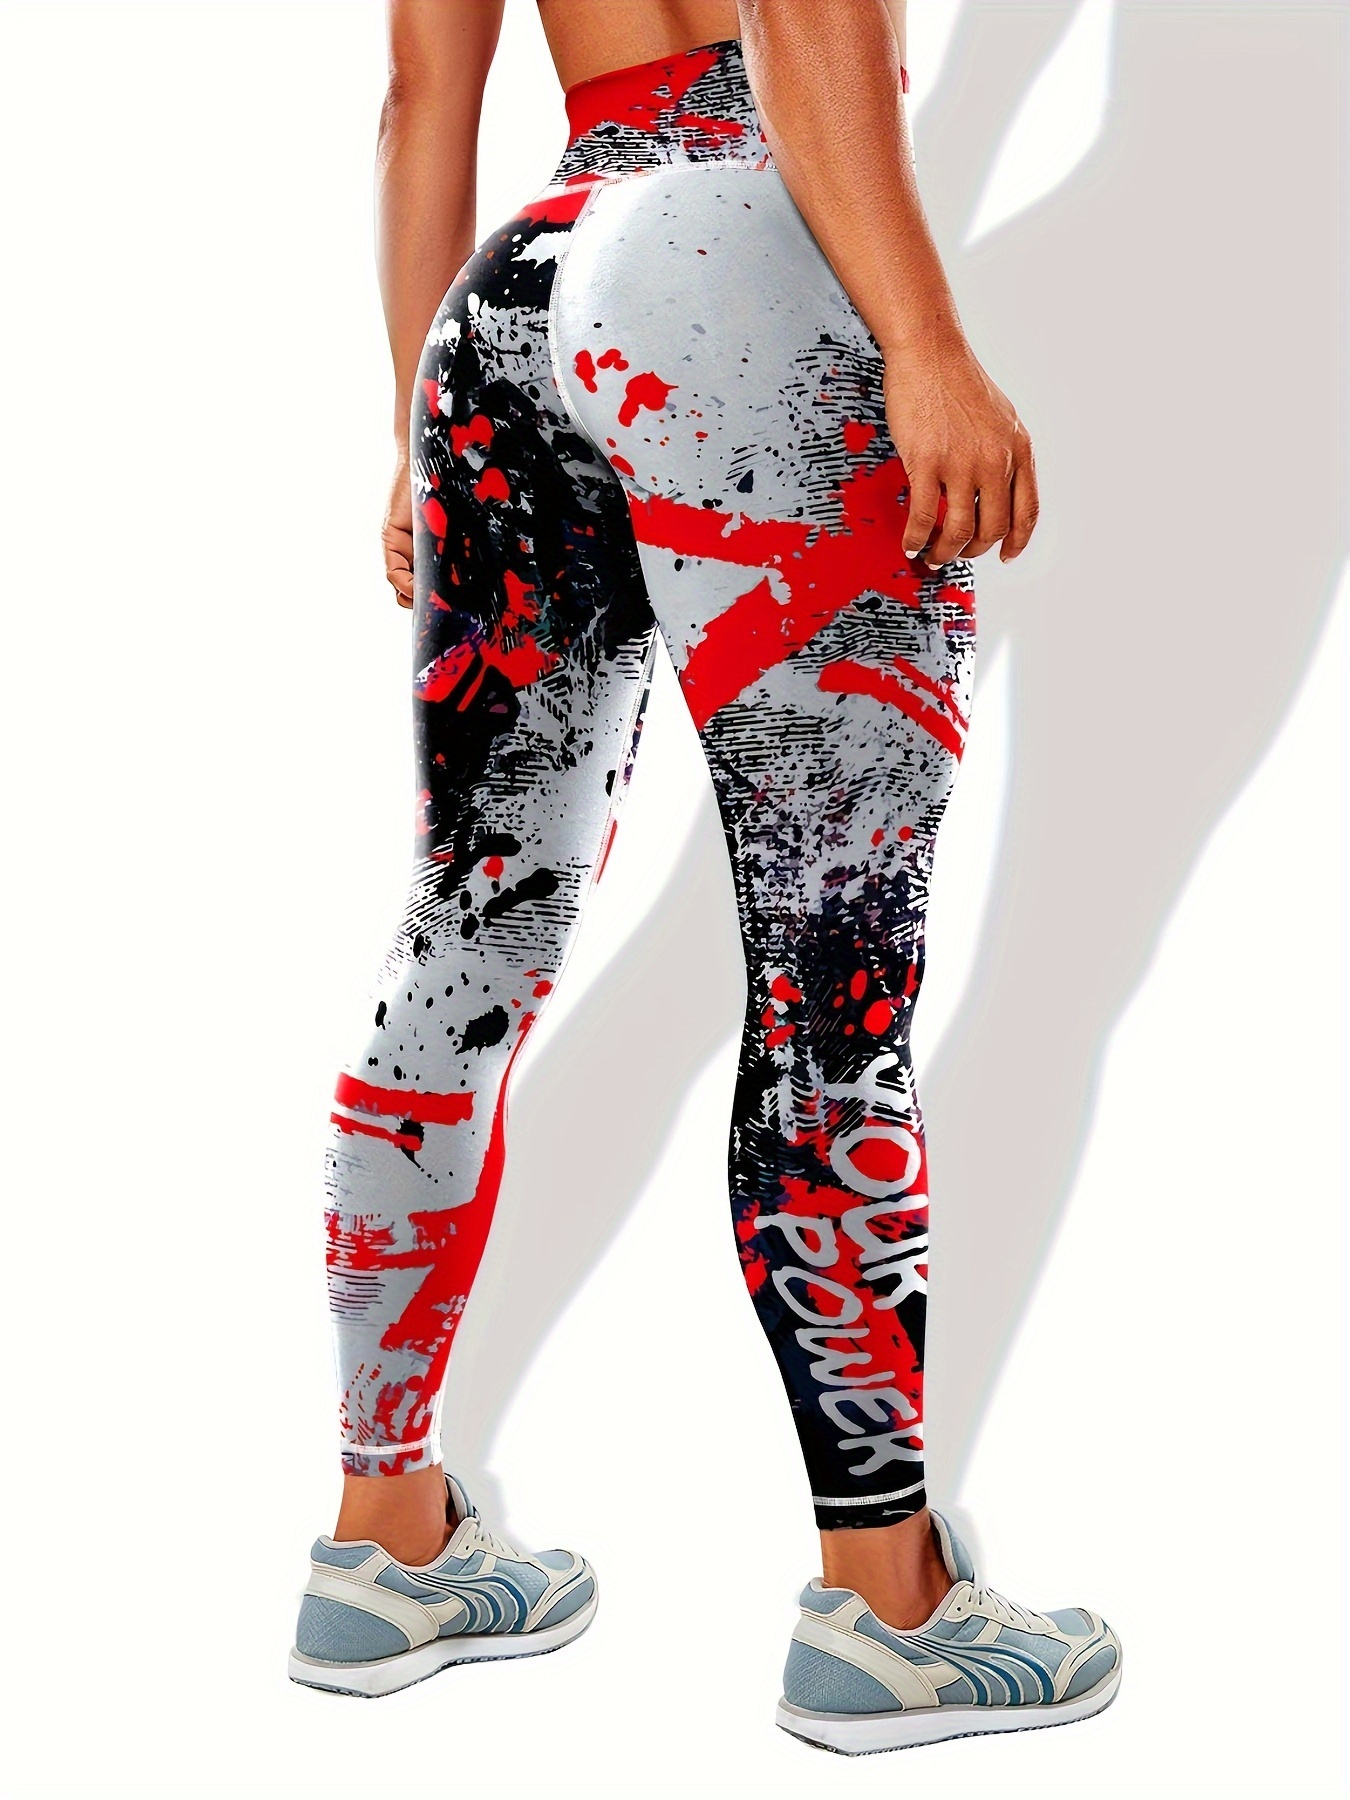 Womens Designer Tracksuit: Fashionable Yoga Outfit With Slim Fit